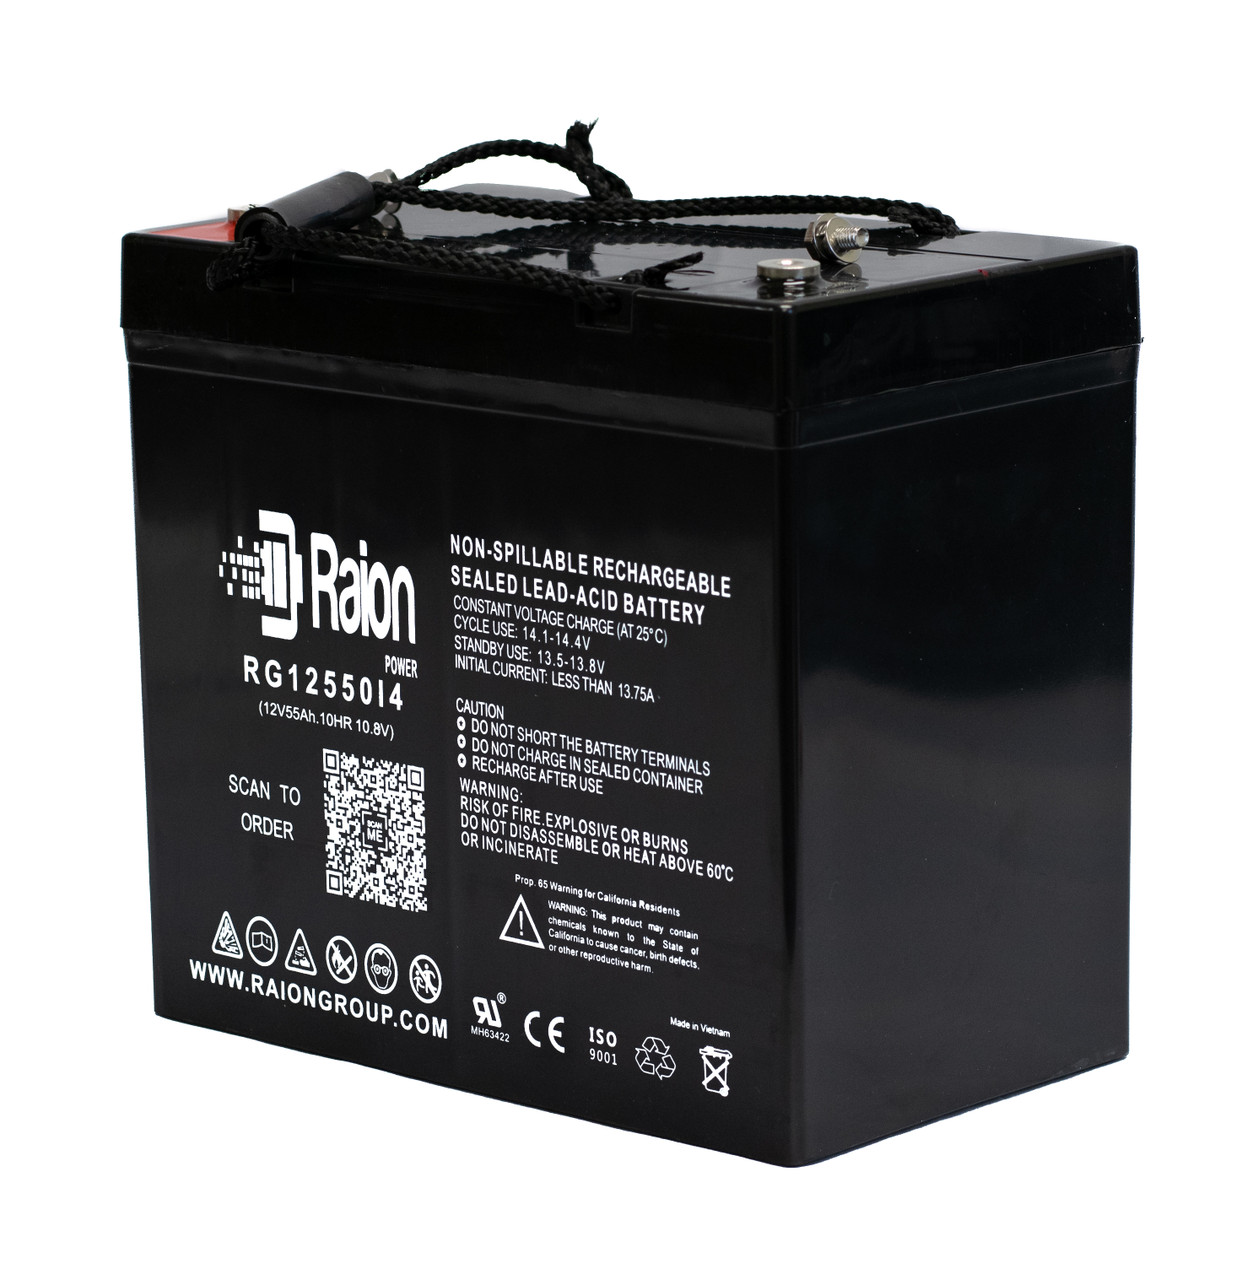 Raion Power 12V 55Ah 22NF Mobility Scooter Battery Replacement for Merits P315